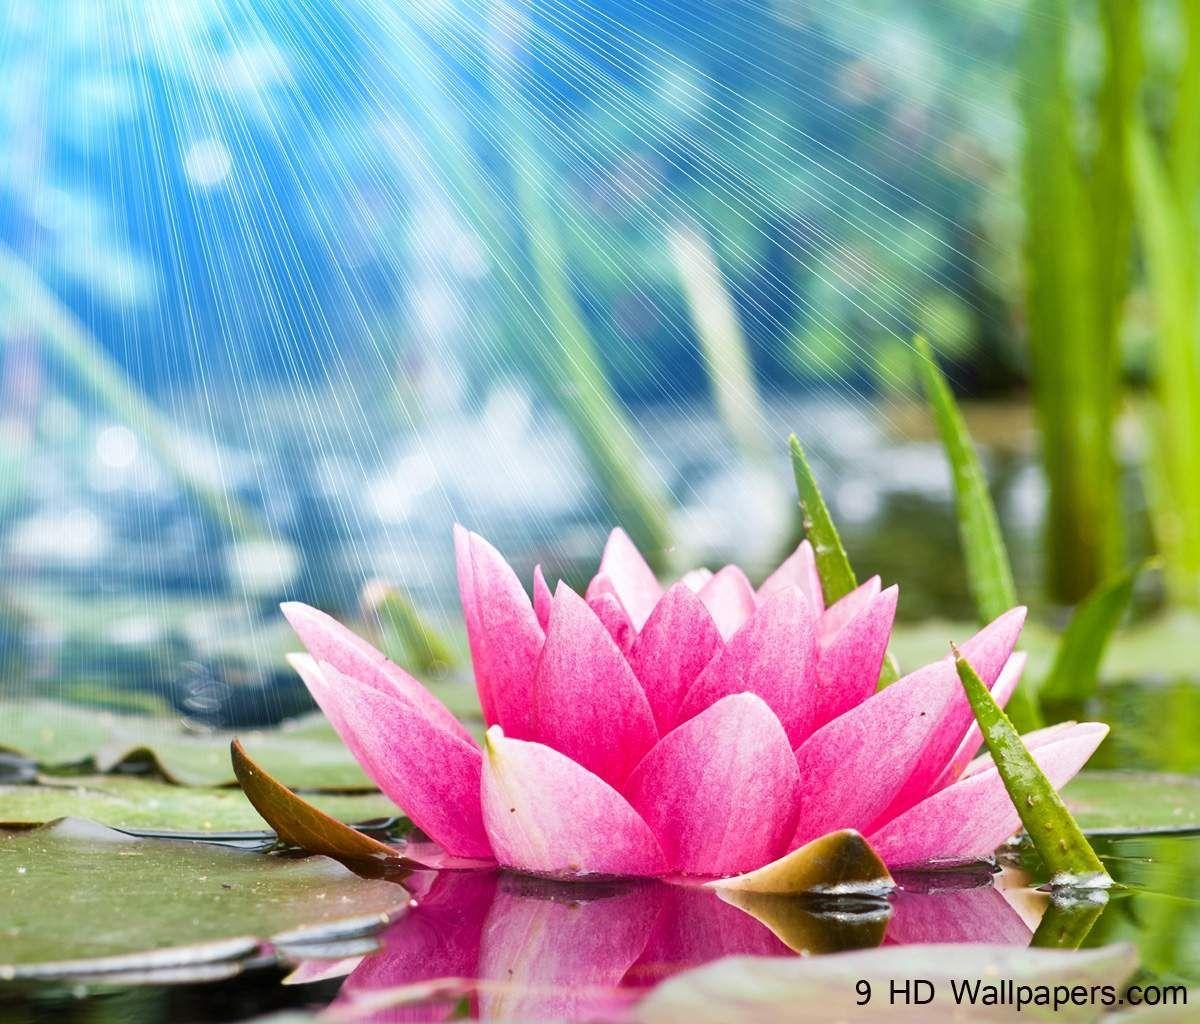 Lotus Flower Wallpaper For Android. Natures Wallpaper